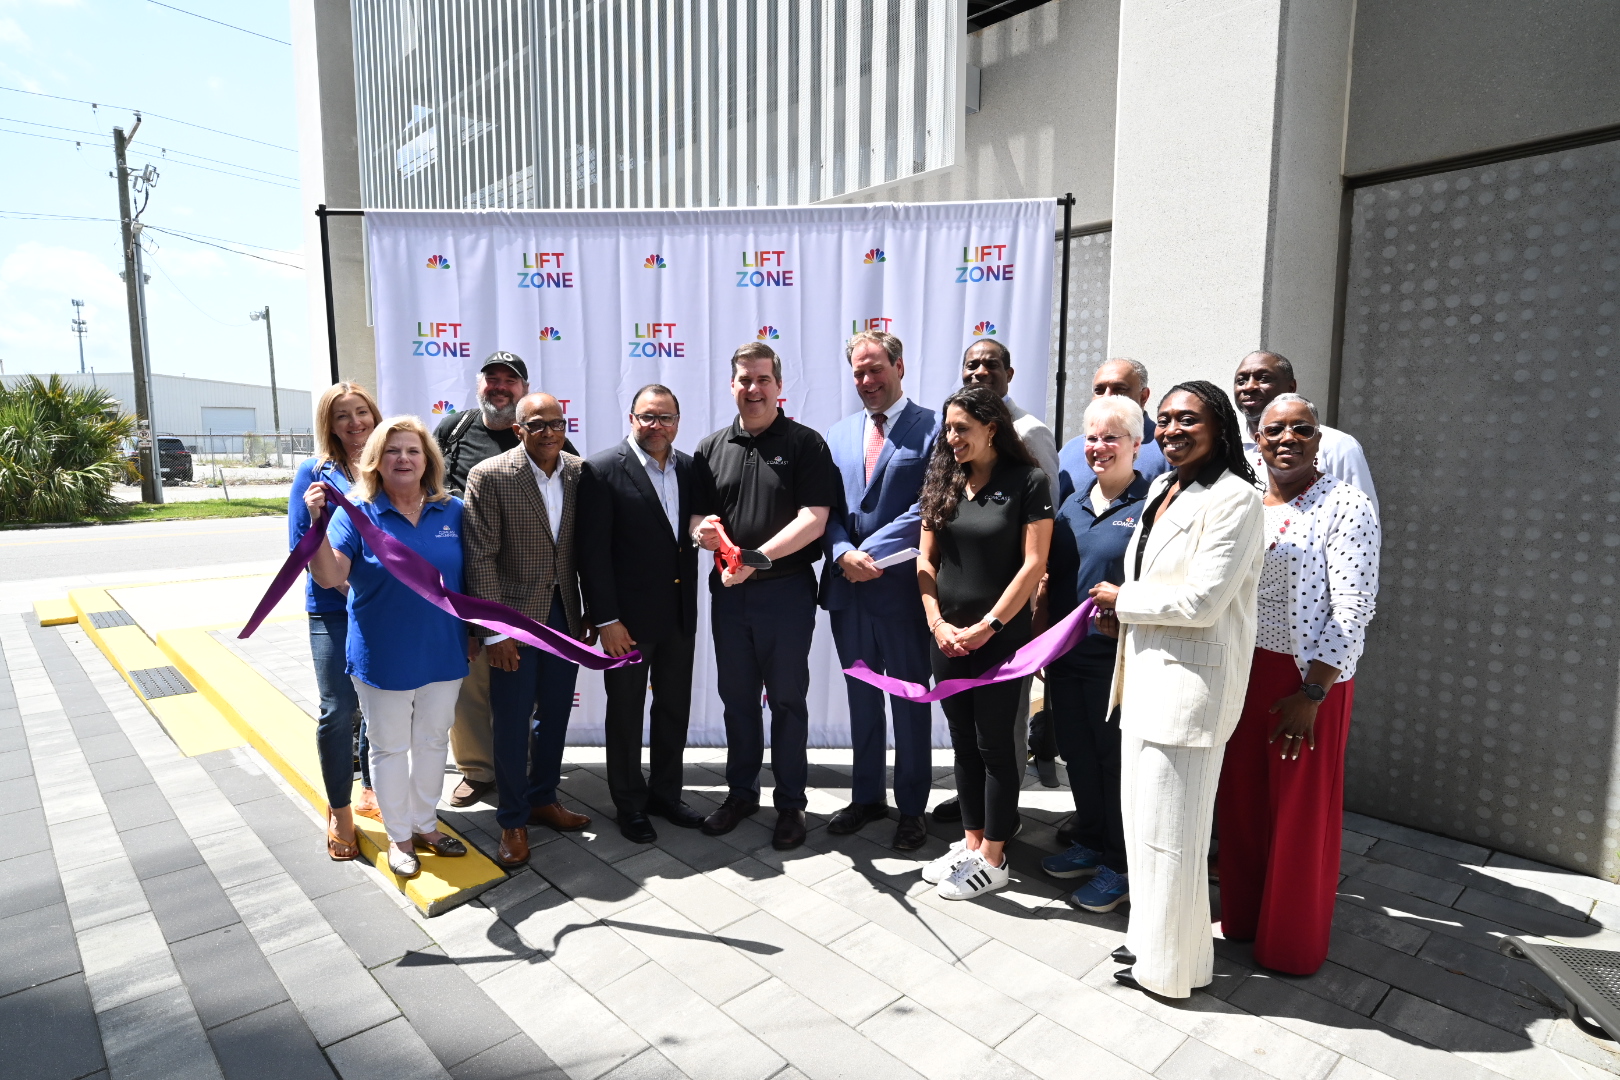 Comcast Launches WiFi-Connected “Lift Zone” in Partnership with the Charleston Digital Corridor Learning Center